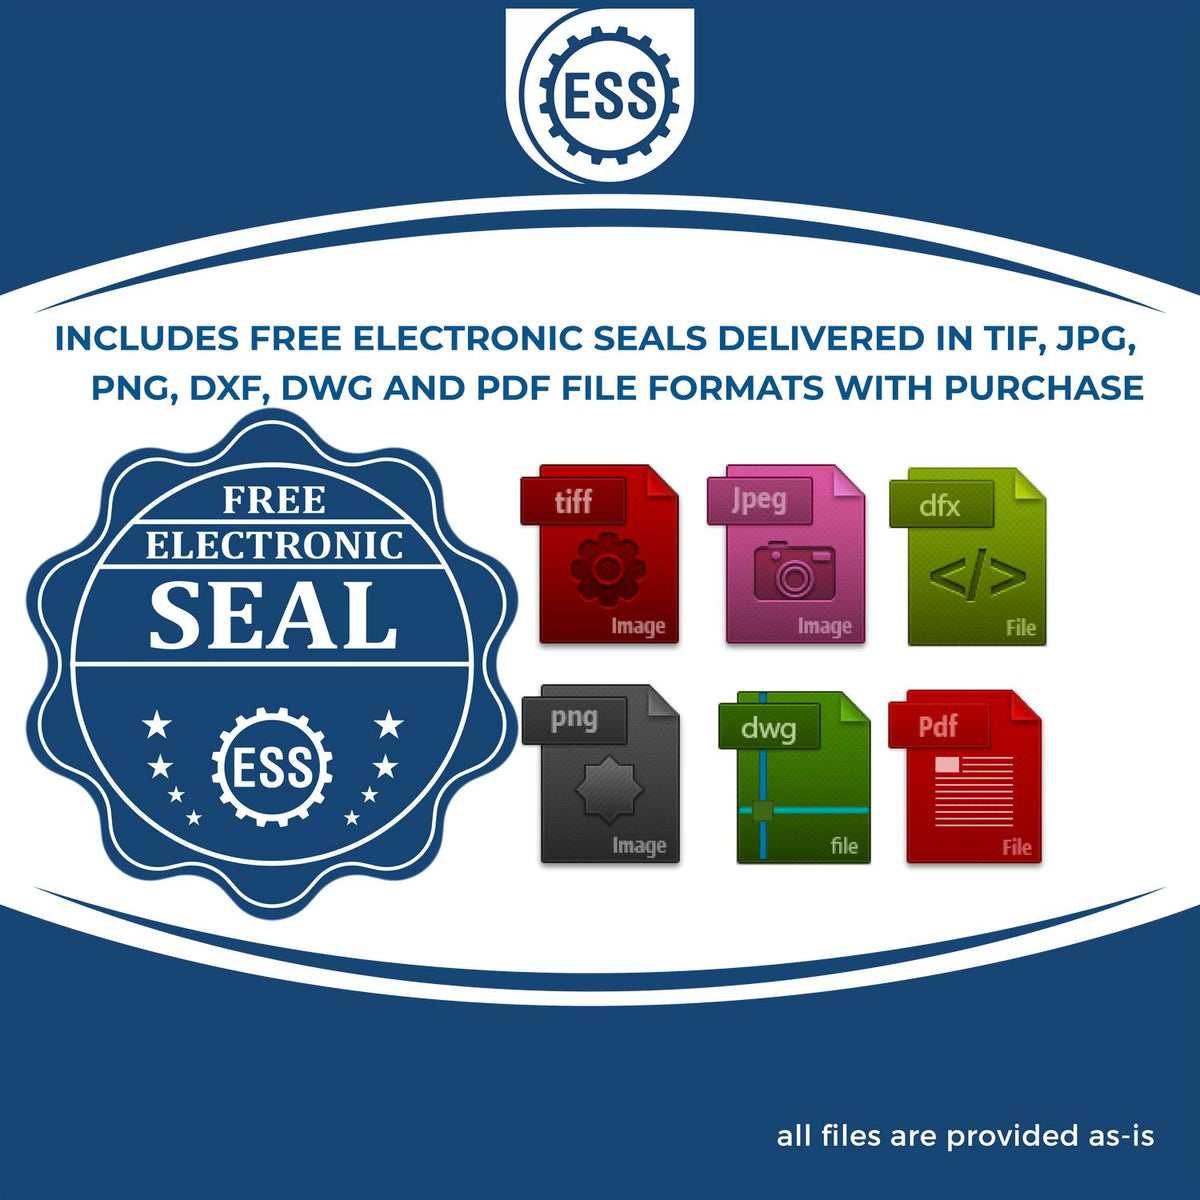 An infographic for the free electronic seal for the Slim Pre-Inked New Jersey Professional Geologist Seal Stamp illustrating the different file type icons such as DXF, DWG, TIF, JPG and PNG.